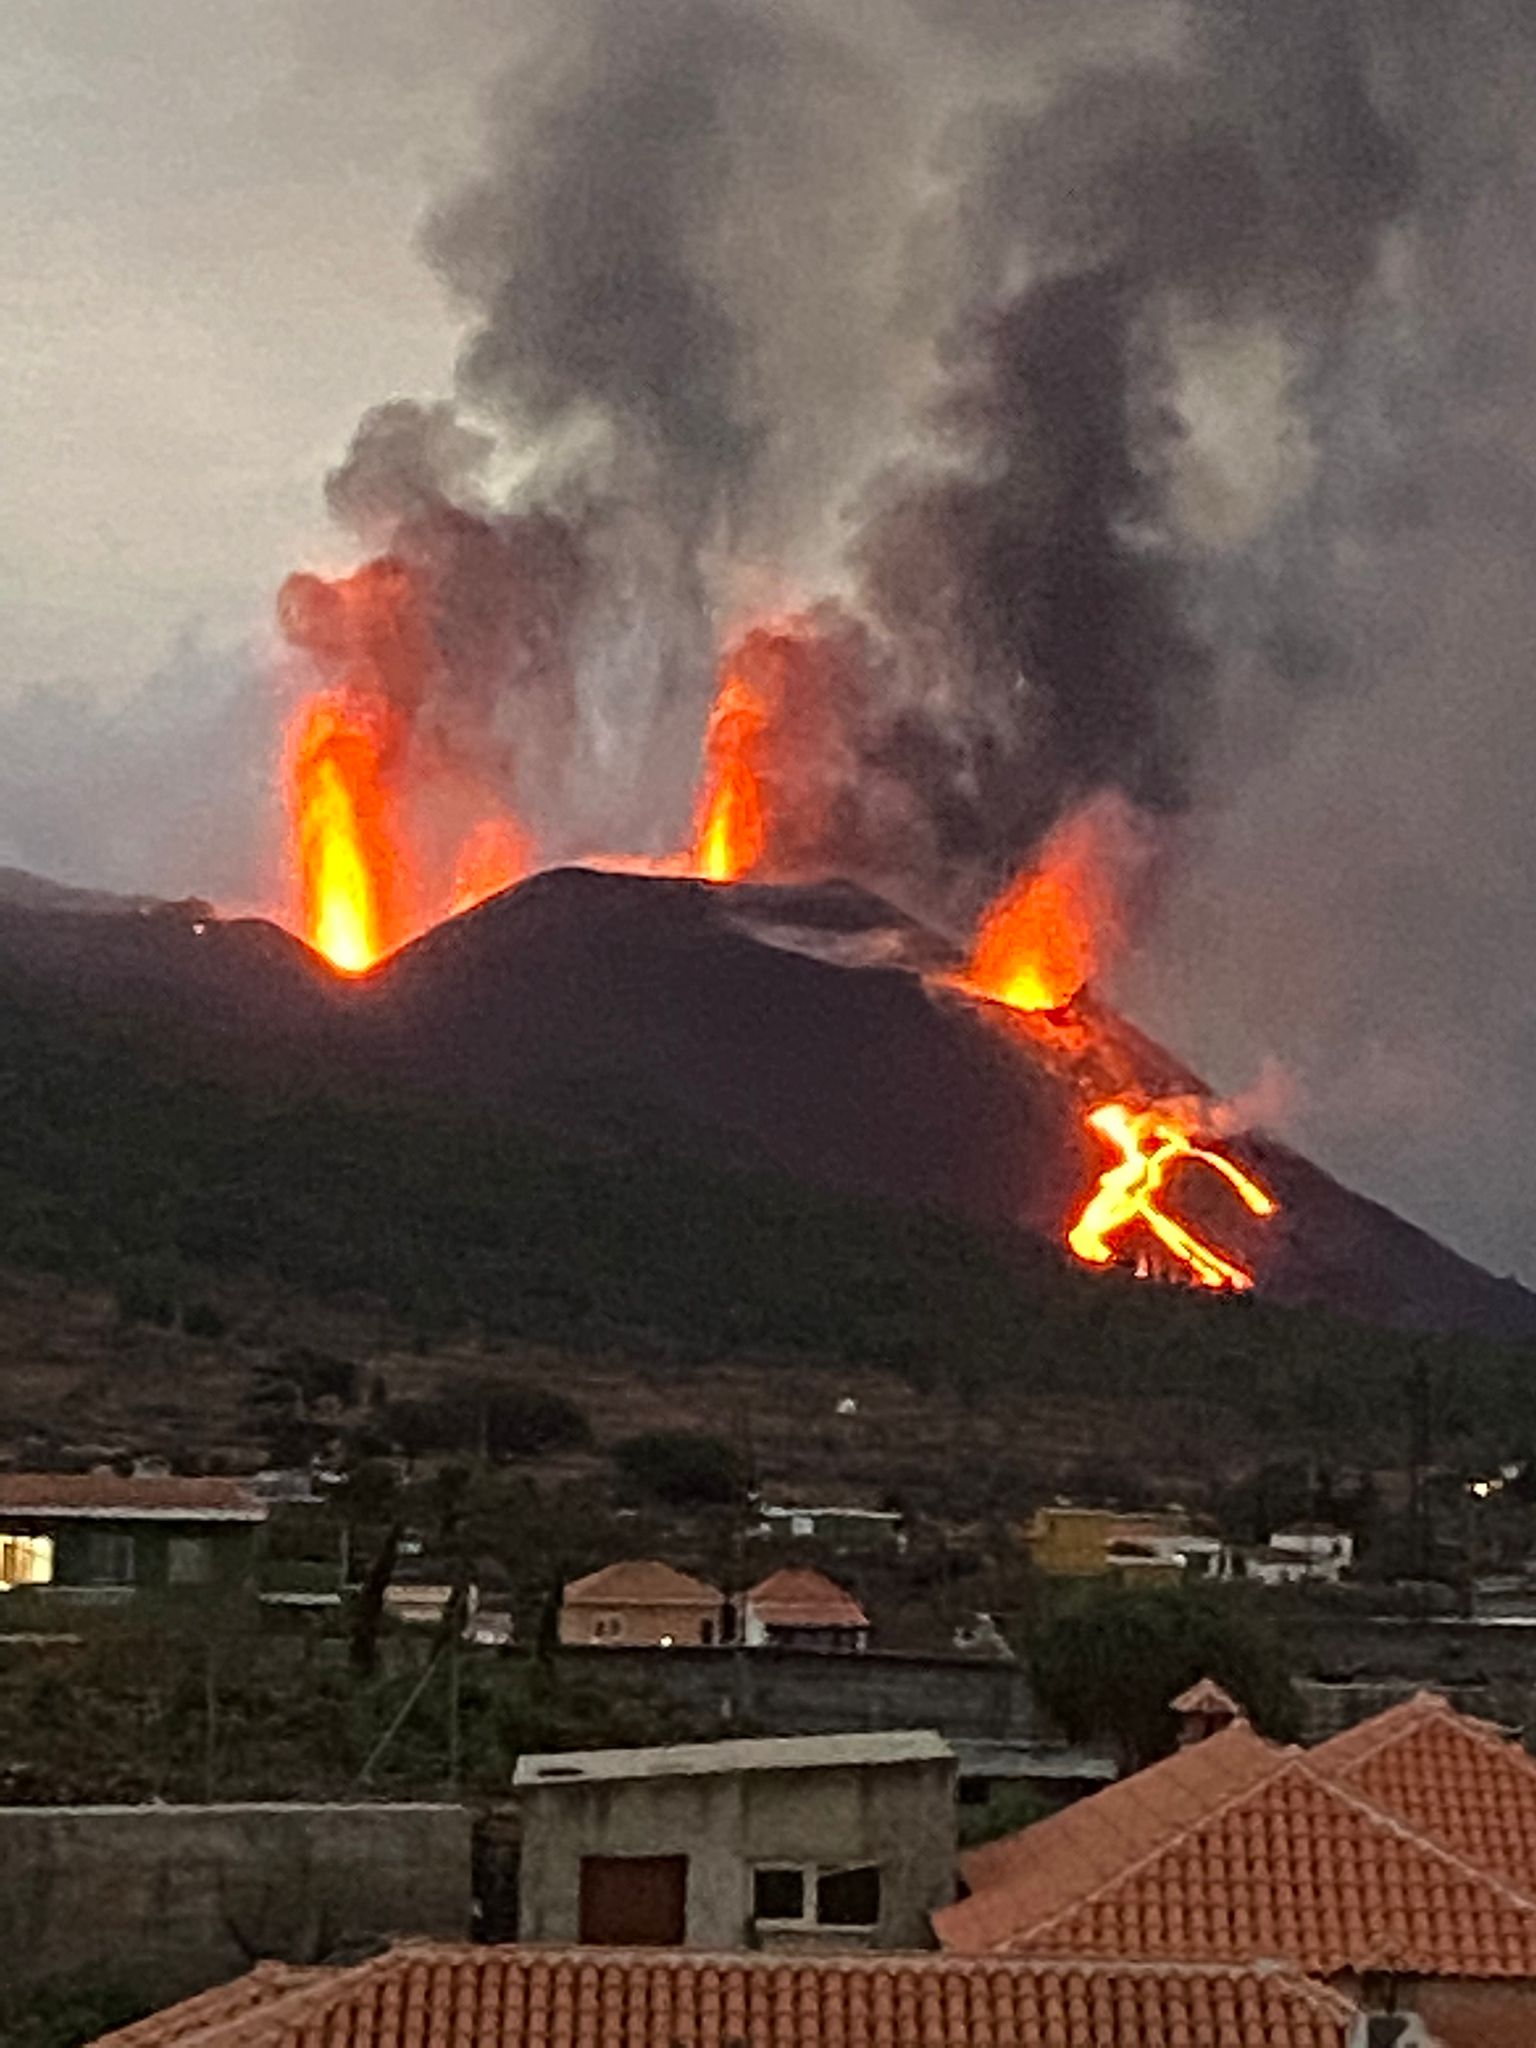 Activity at the vents last evening or early today (image: author unknown, via Volcanes de Canarias @VolcansCanarias / twitter)